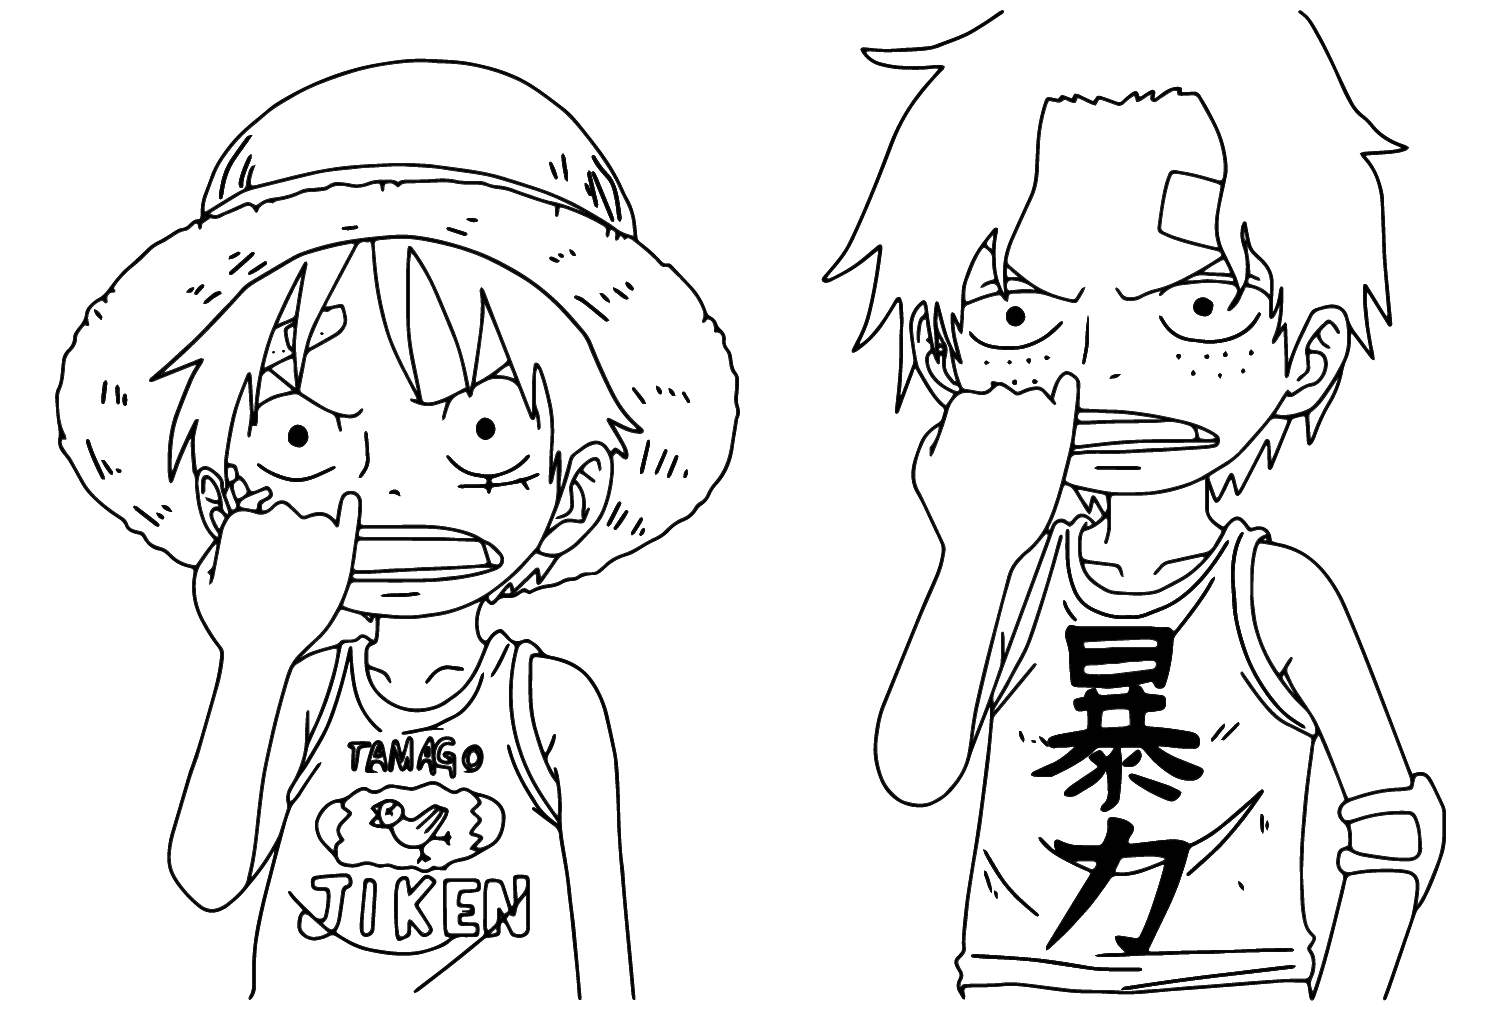 Portgas D. Ace and Luffy Coloring Page from Portgas D. Ace